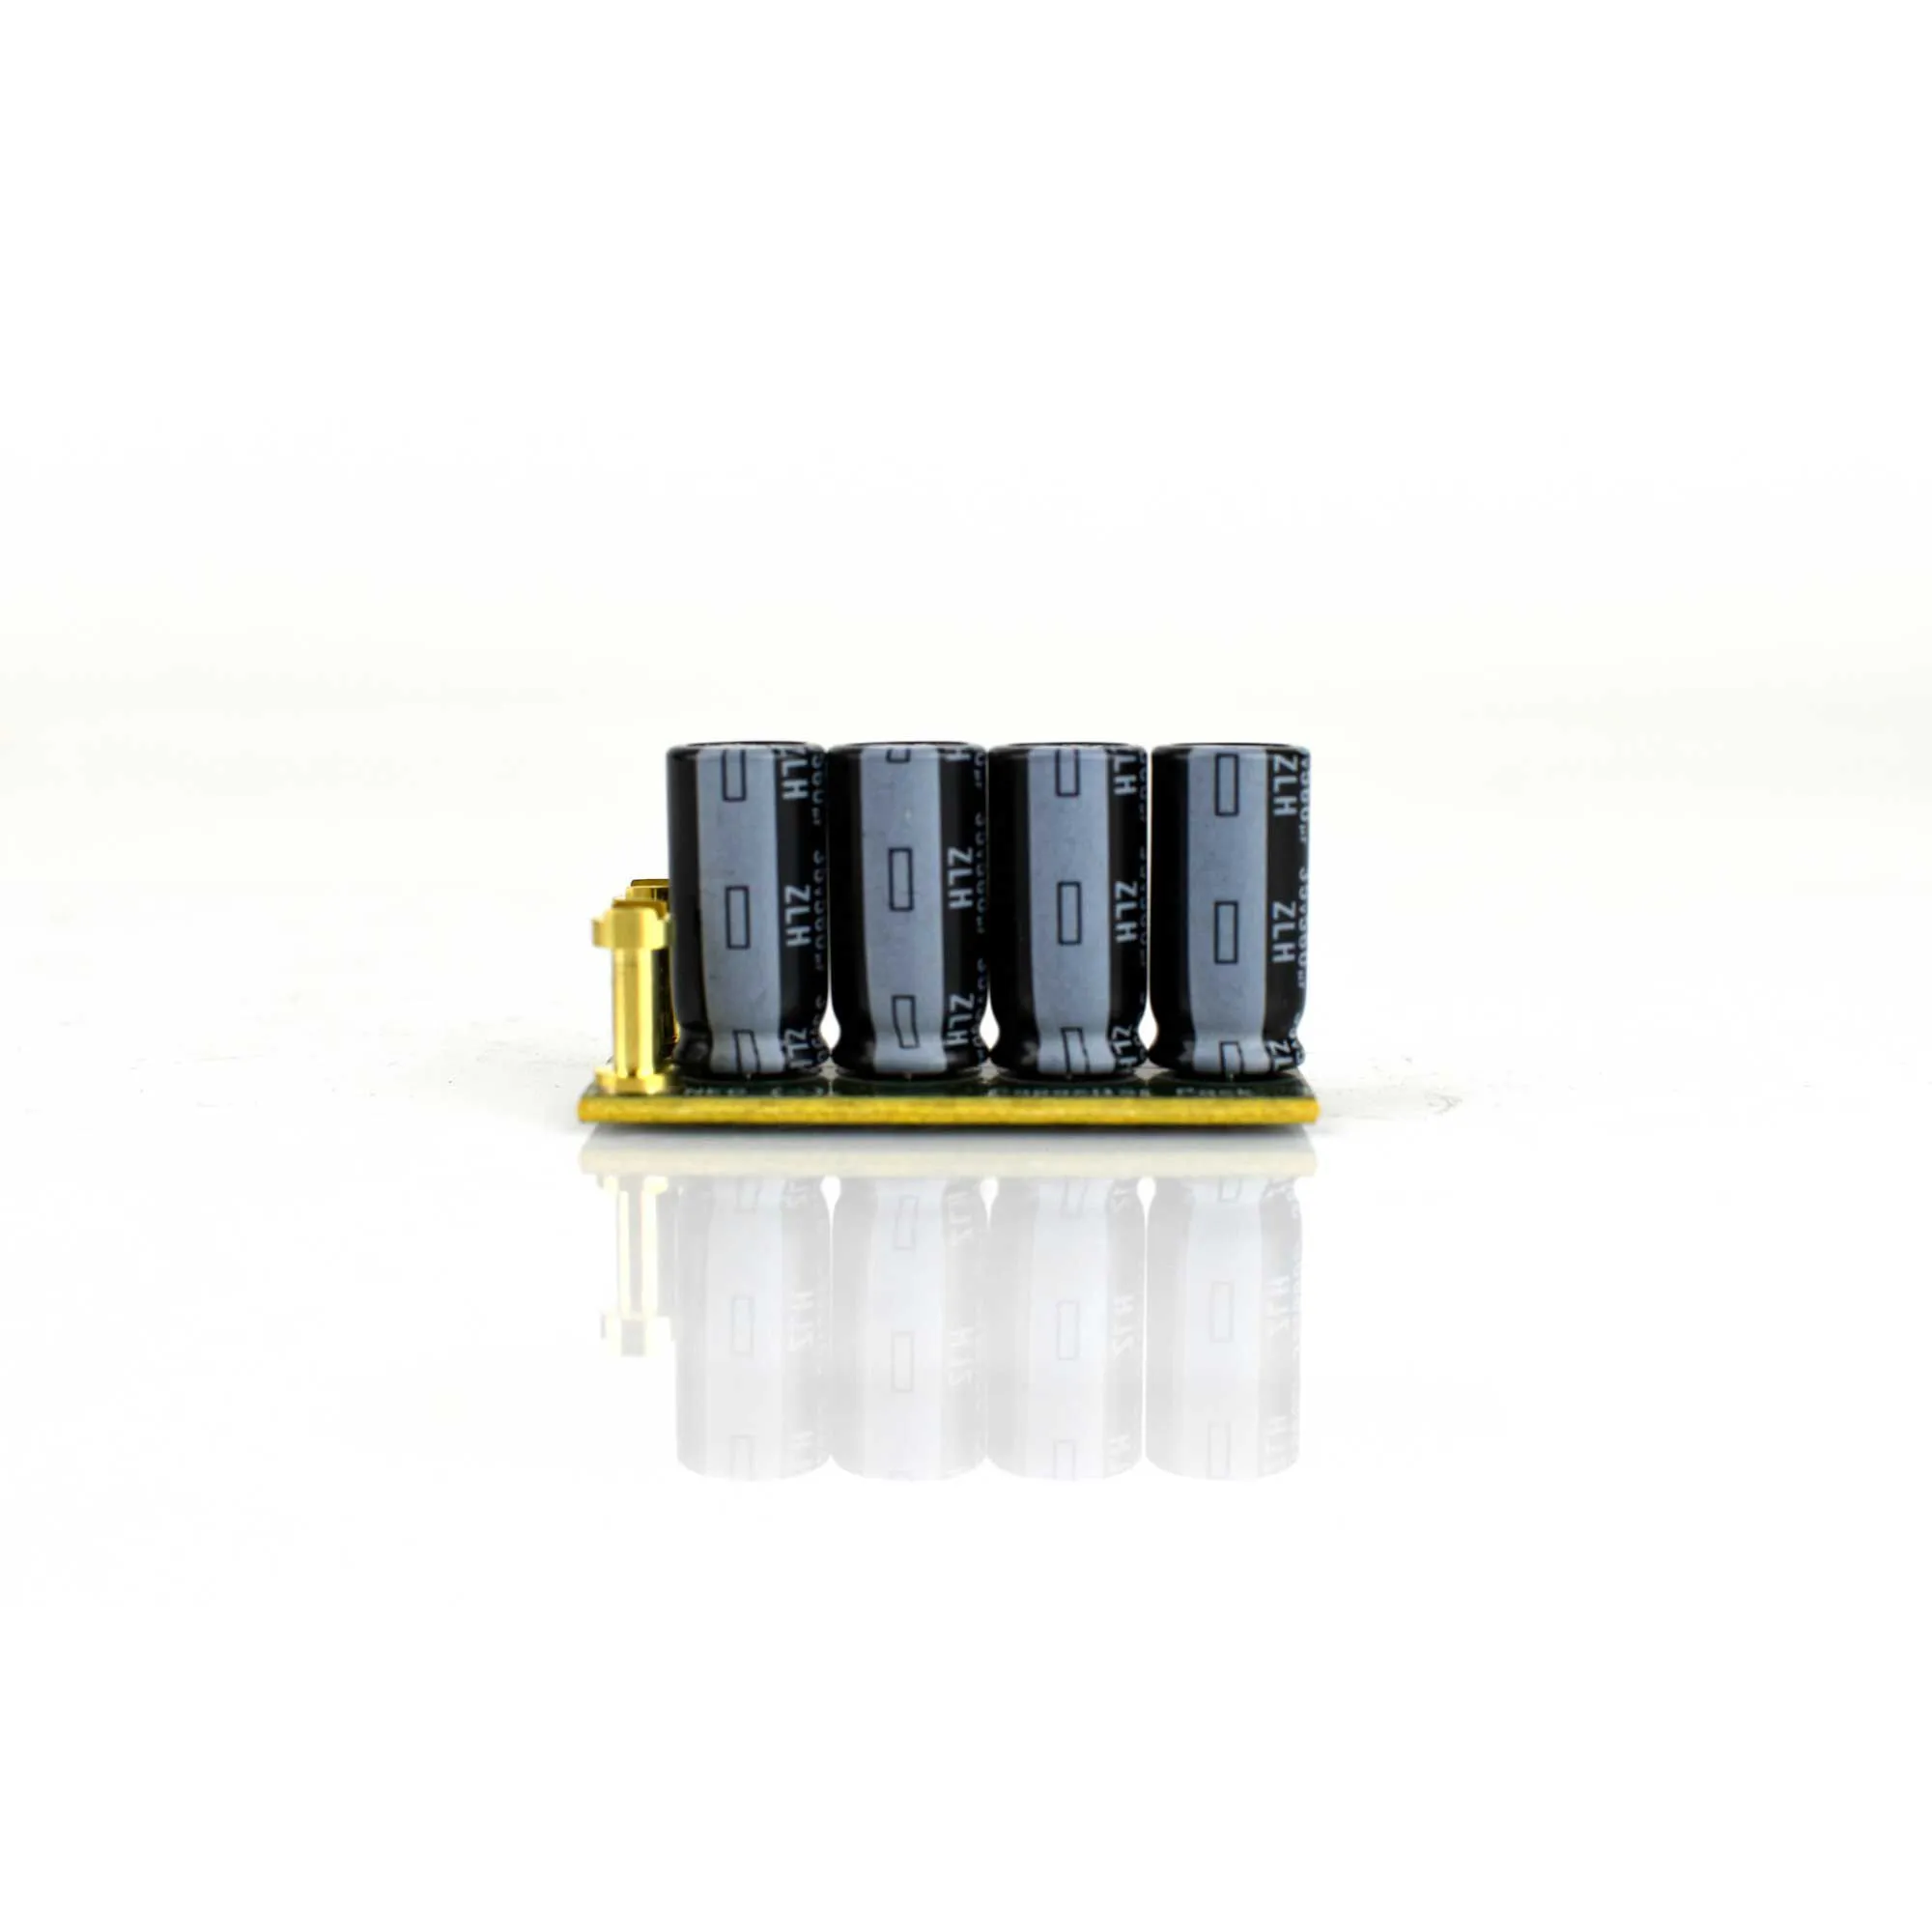 Castle Creations 8S CapPack 2240UF Capacitor Pack